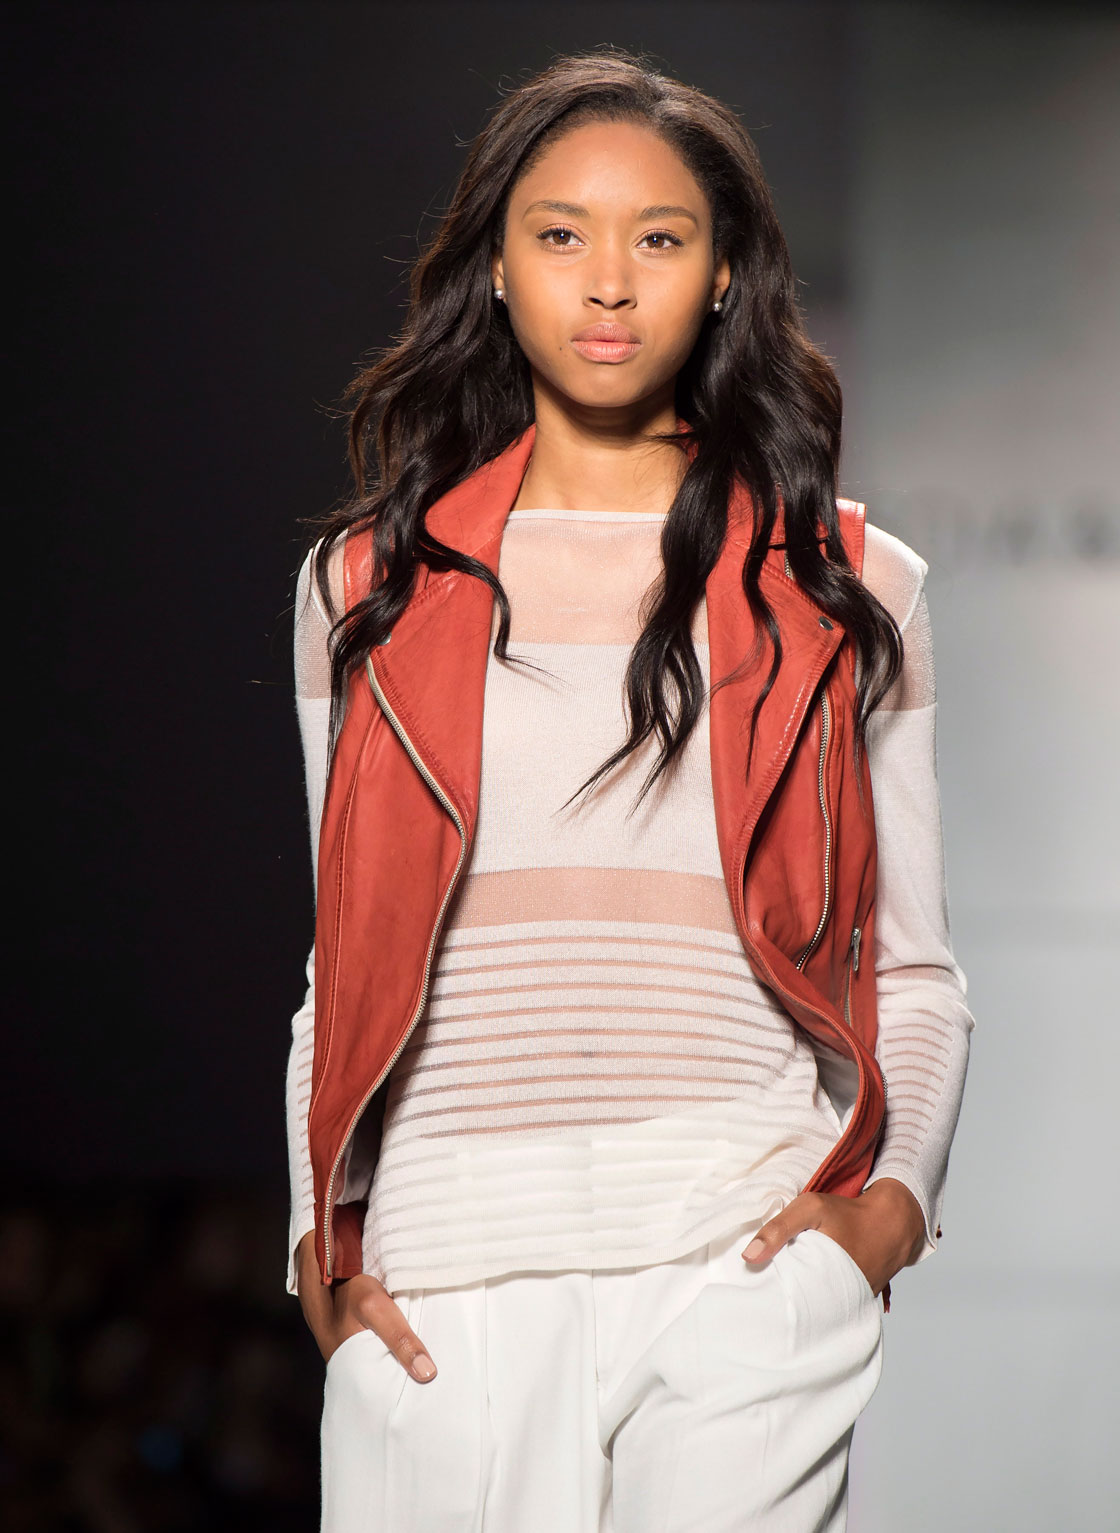 A model walks the runway in the Soia & Kyo show, part of Fashion Week in Toronto on Thursday October 23, 2014.